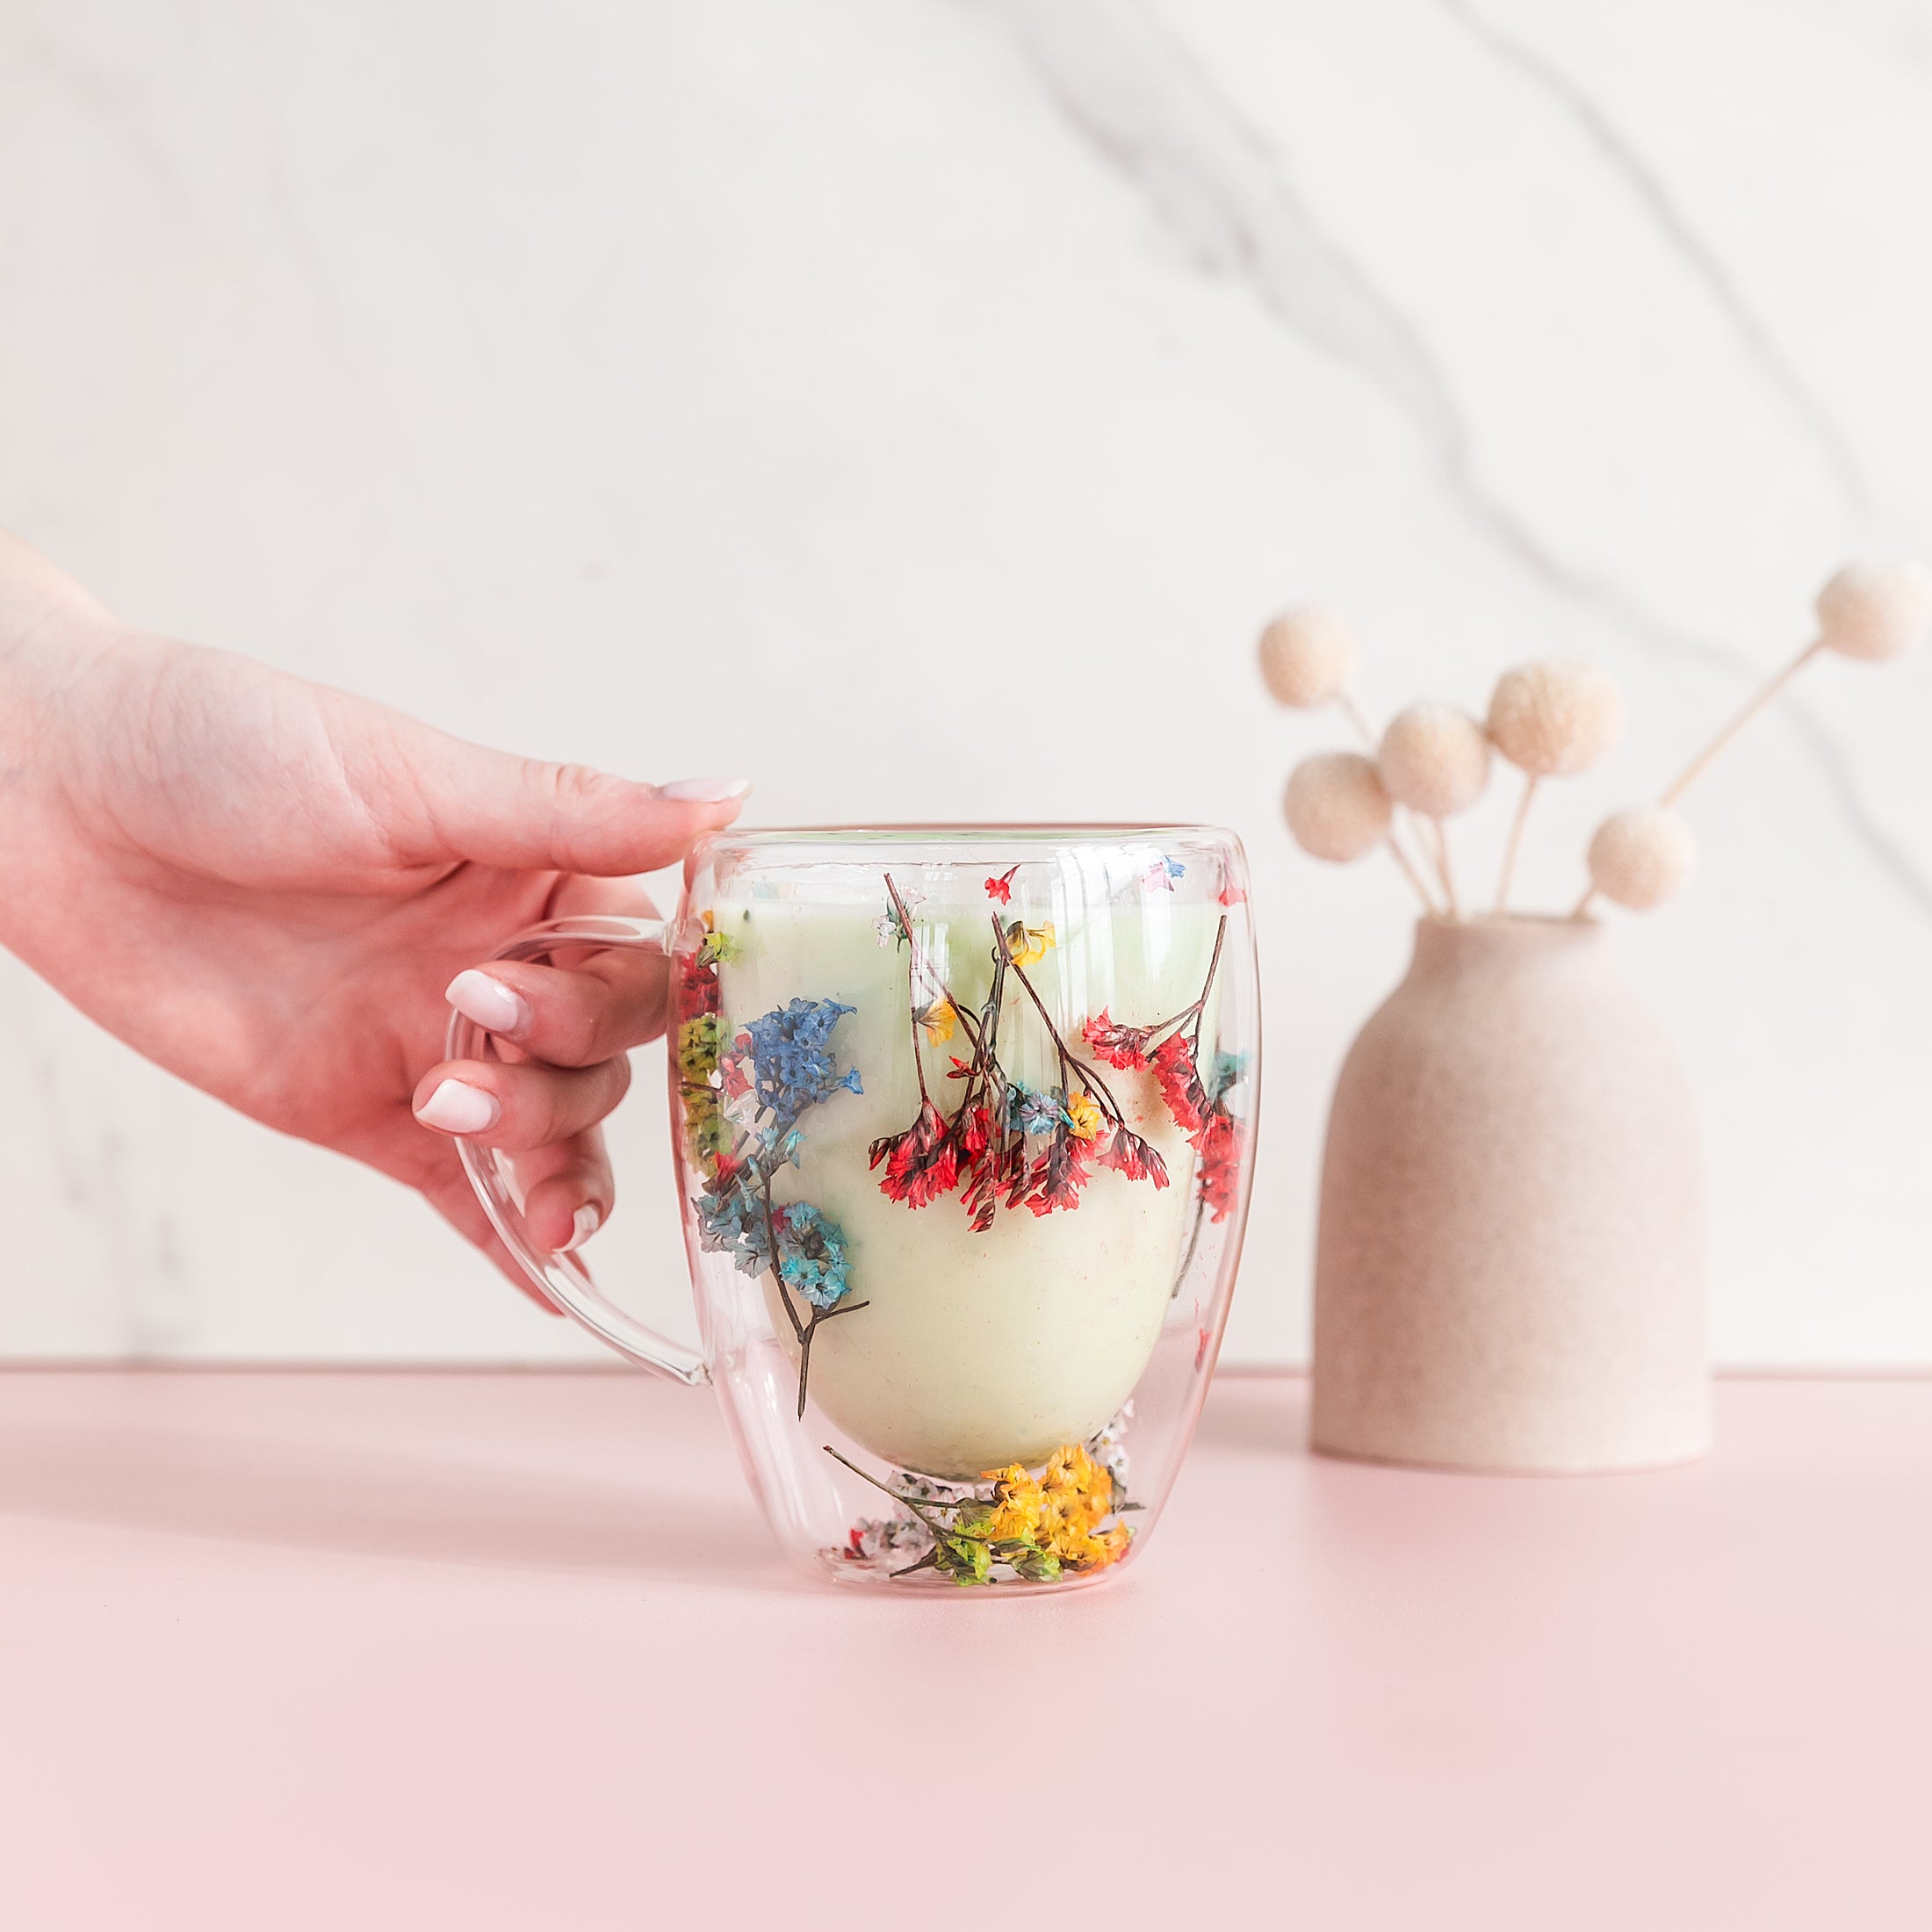 a person is holding a glass cup with flowers on it